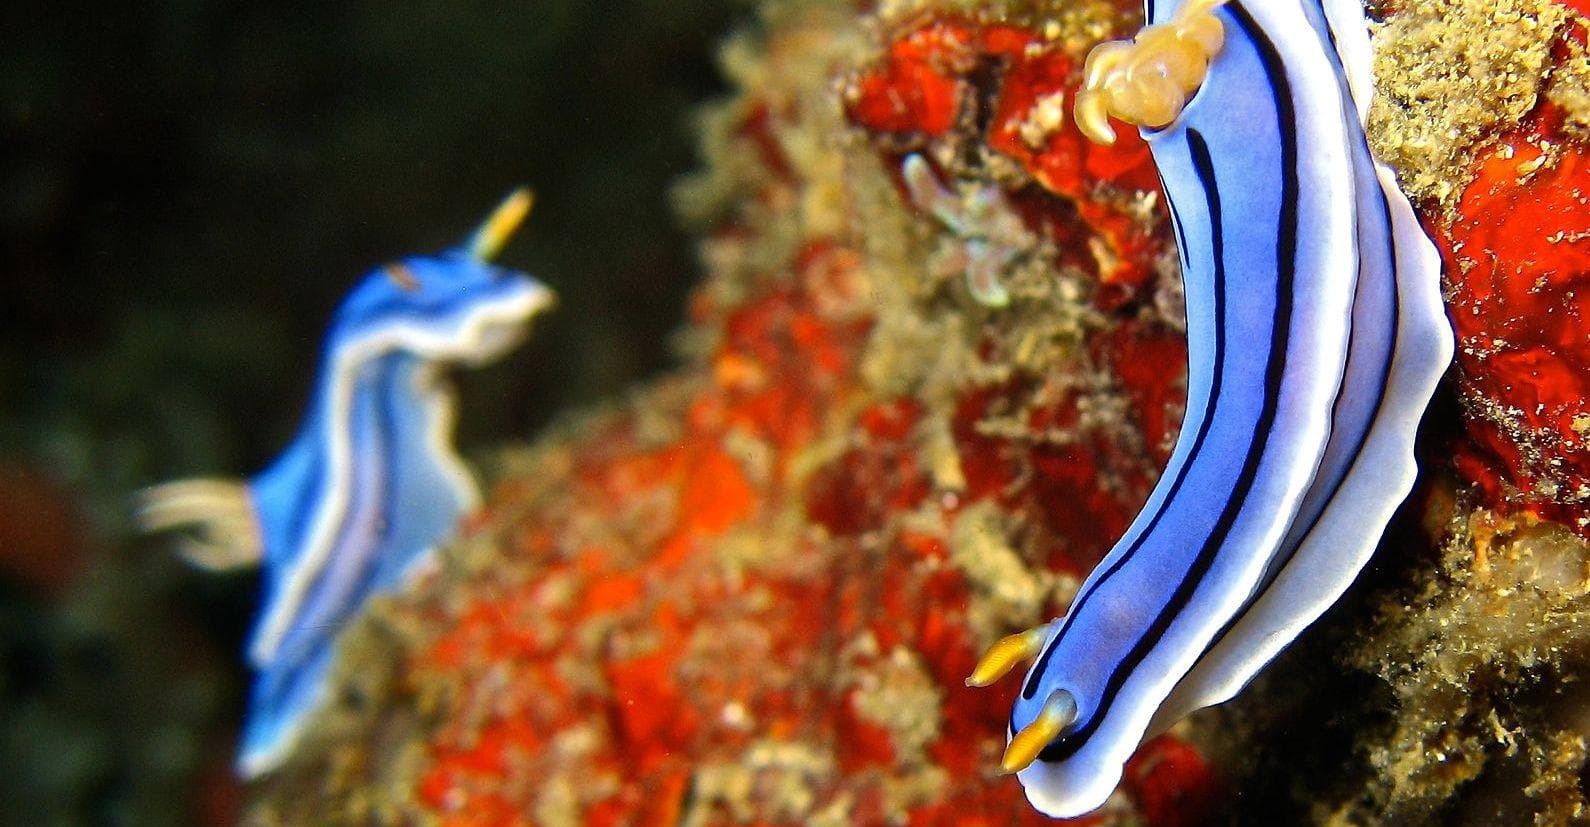 21 Of The Most Poisonous Sea Creatures and Deadly Ocean Animals